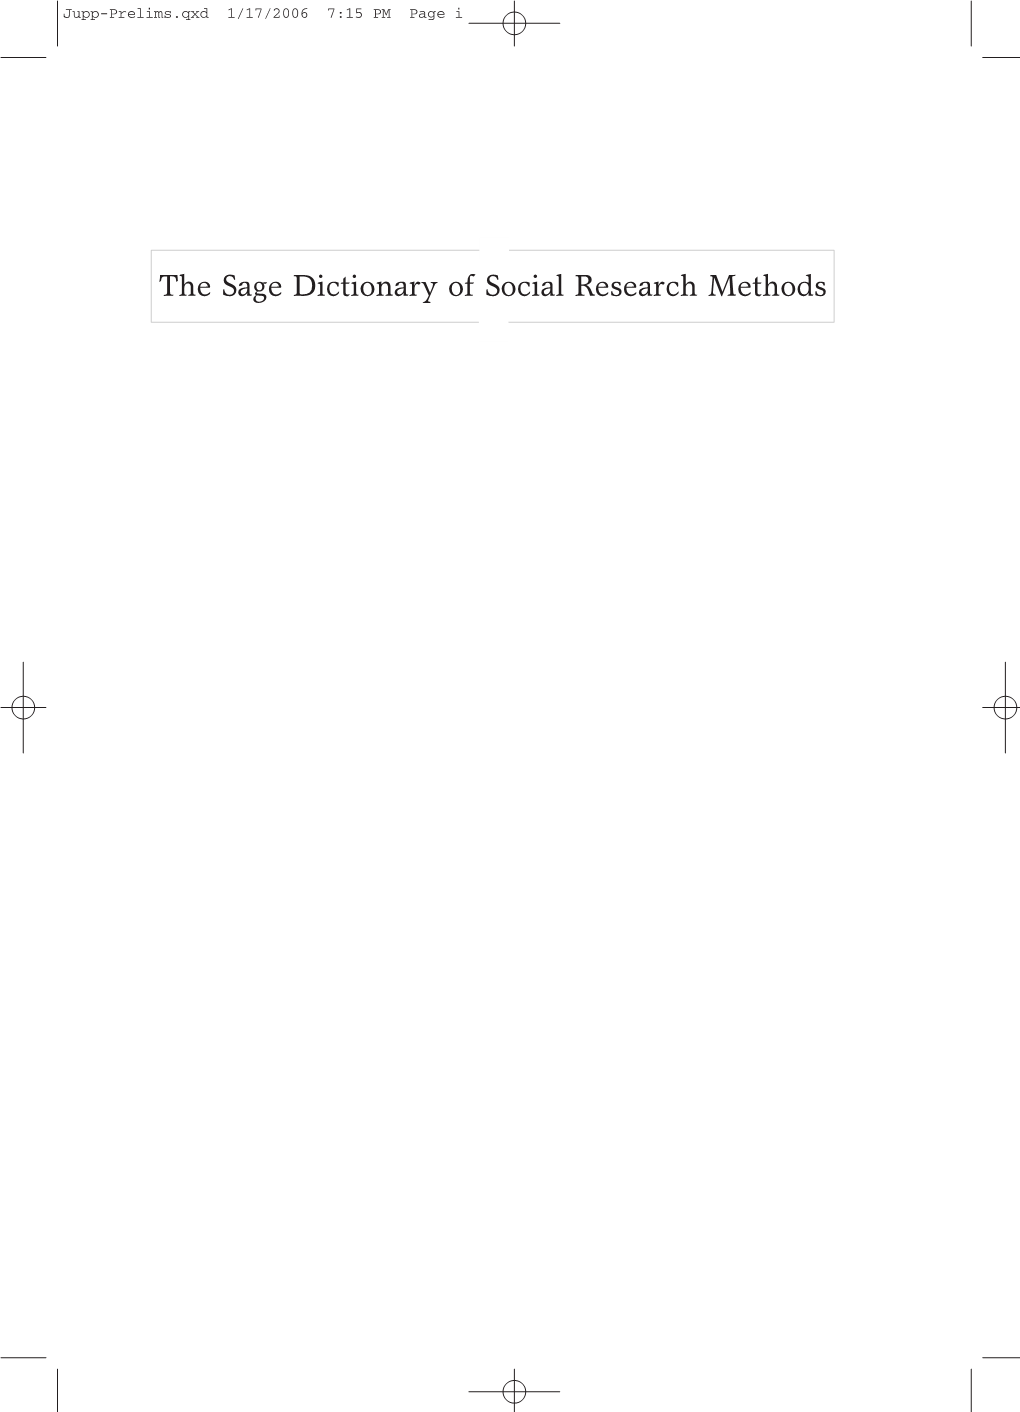 The Sage Dictionary of Social Research Methods Jupp-Prelims.Qxd 1/17/2006 7:15 PM Page Ii Jupp-Prelims.Qxd 1/17/2006 7:15 PM Page Iii